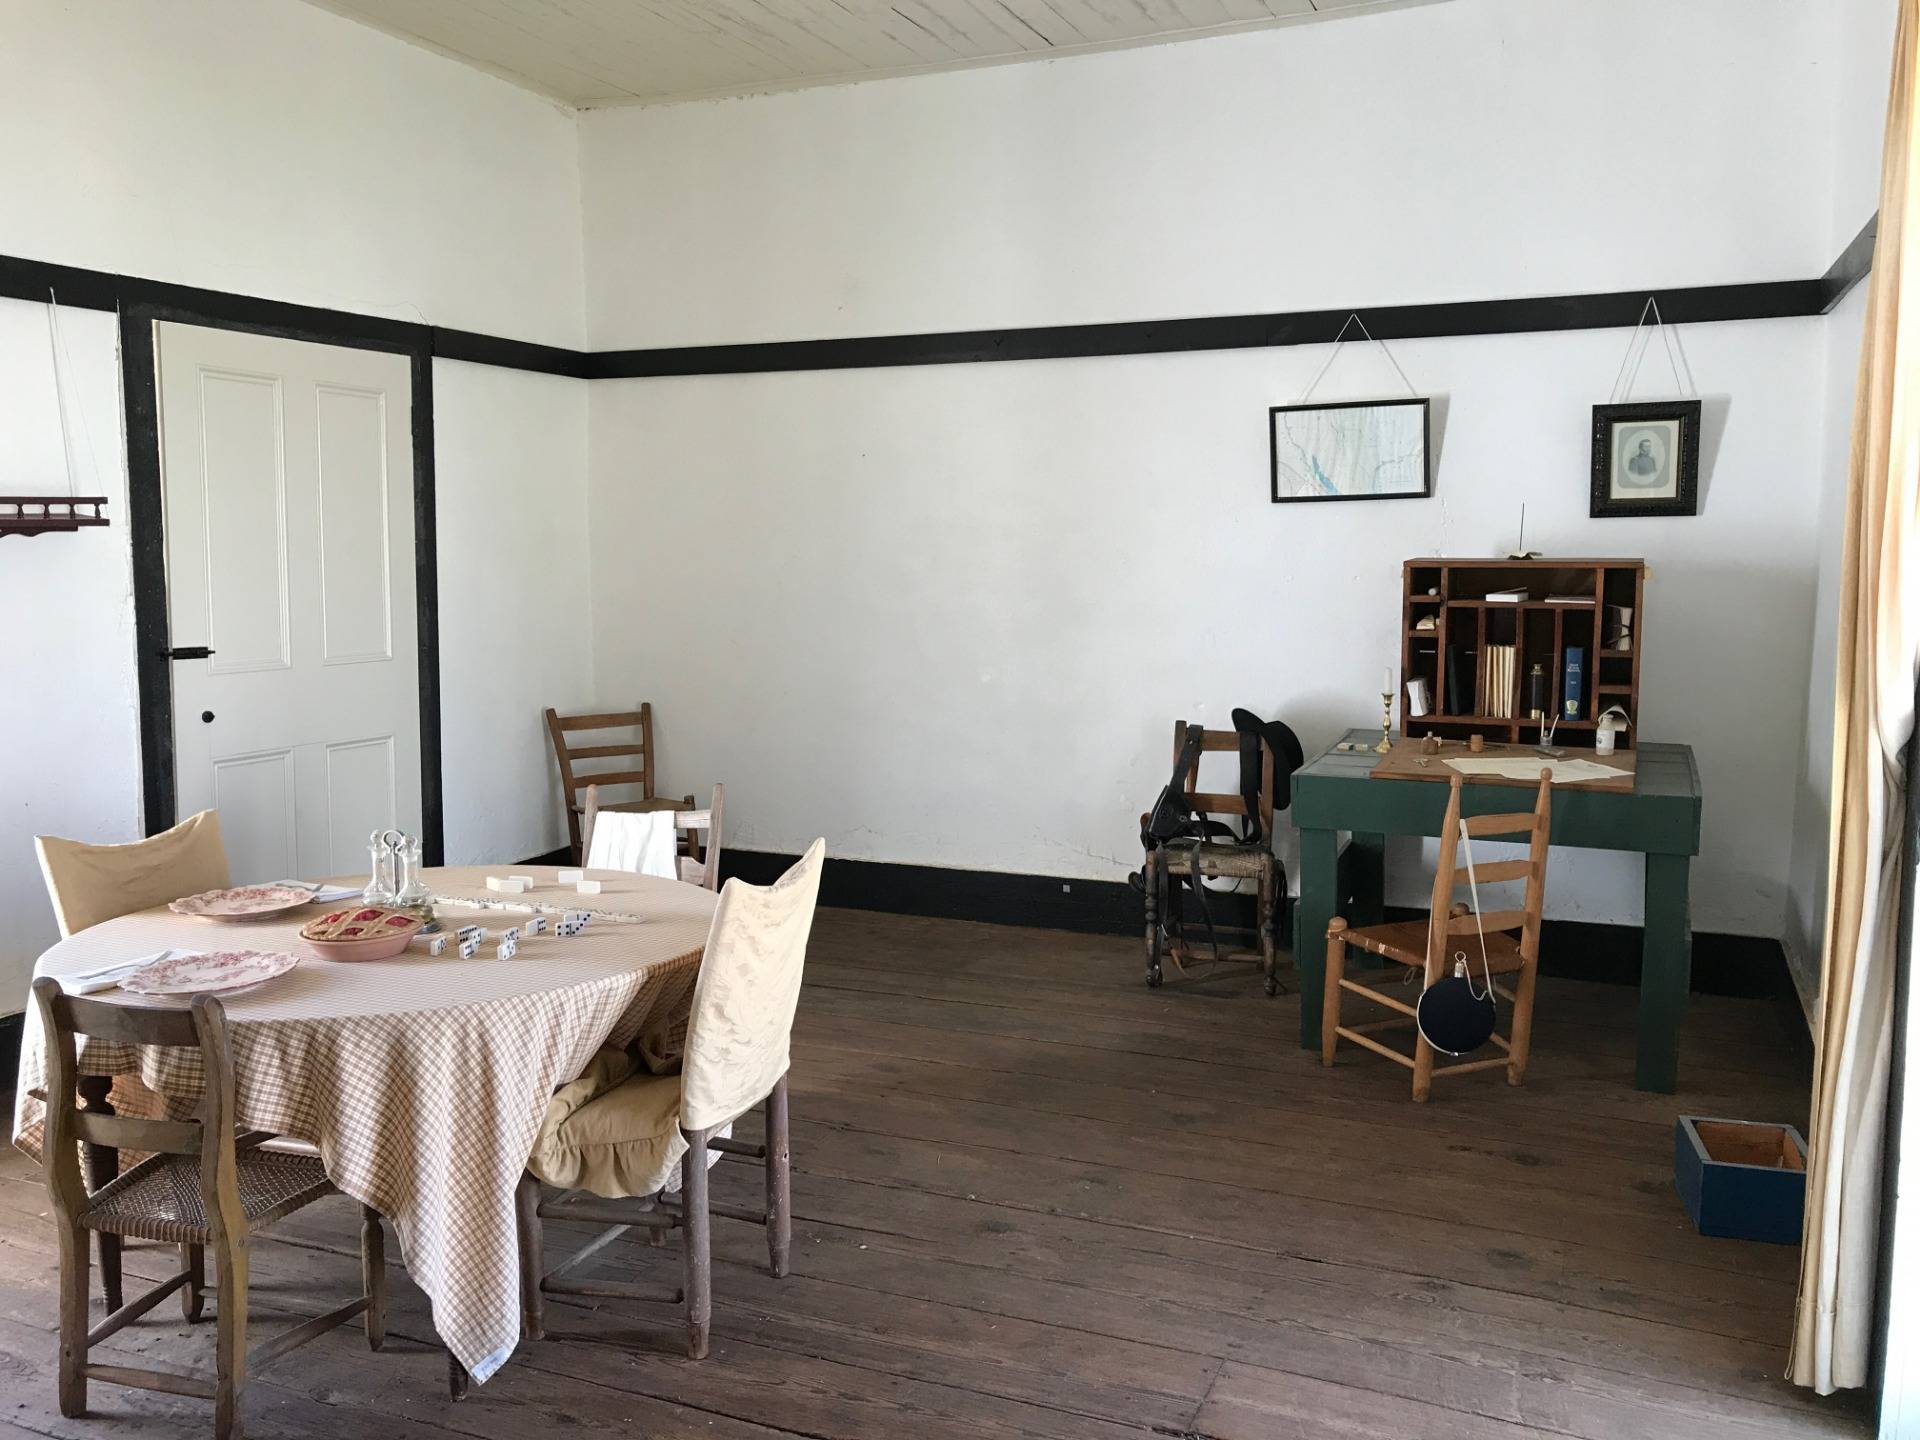 Married officer’s dining room and study